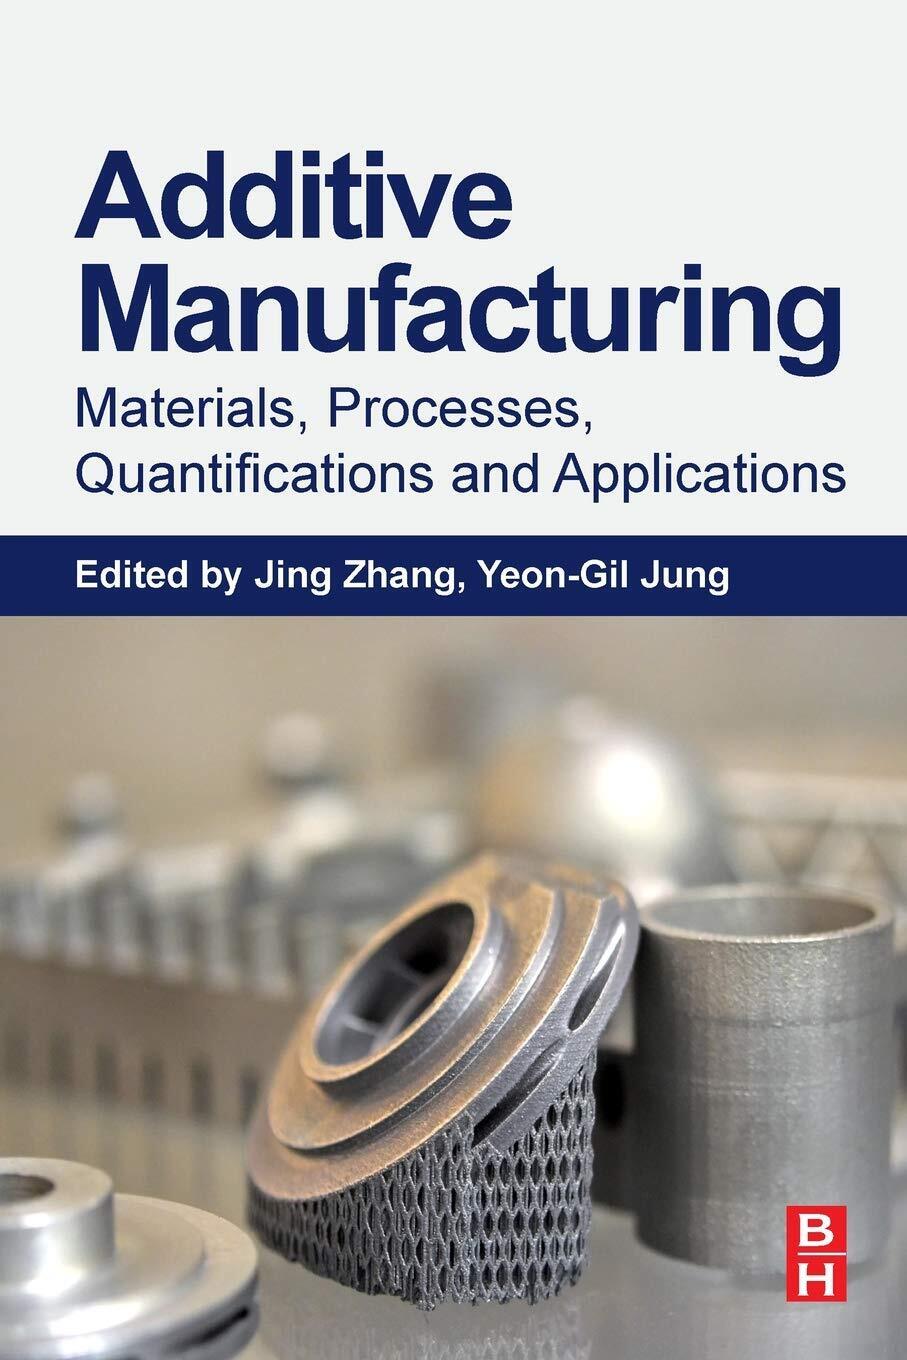 Additive Manufacturing - Zhang, Jung - BUTTERWORTH, 2018